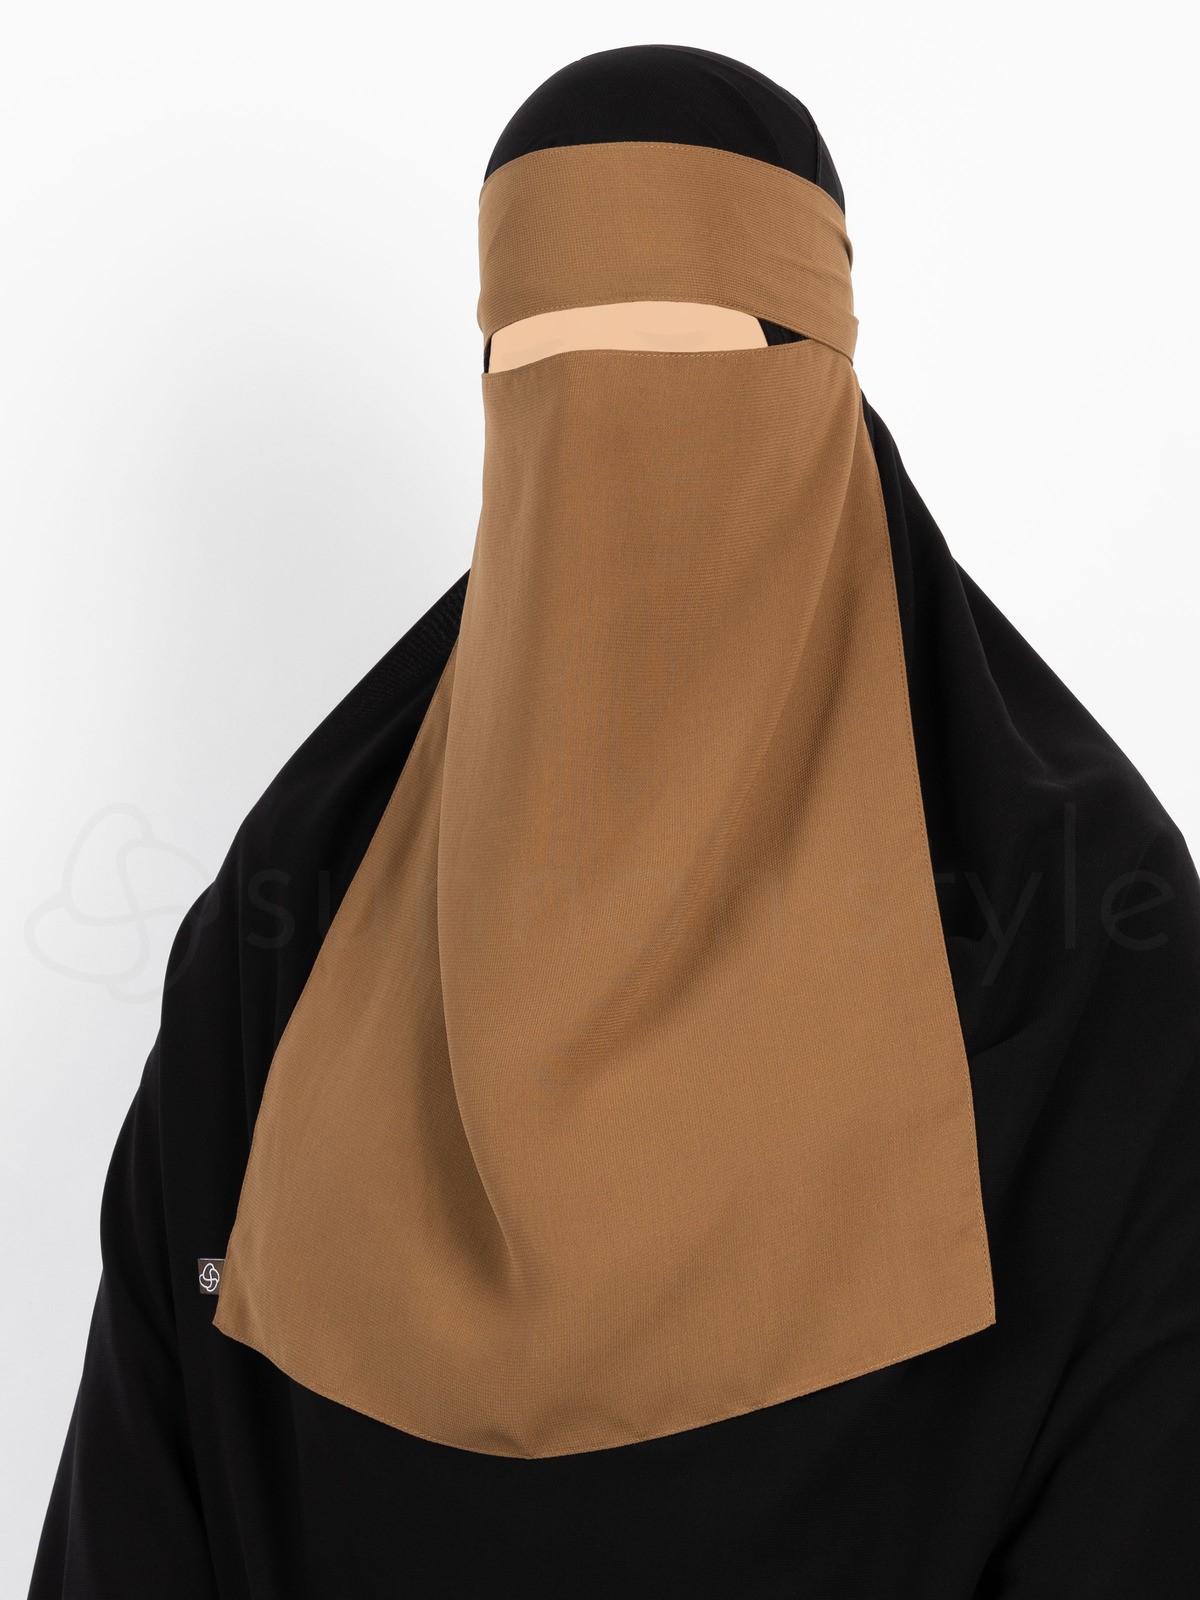 Sunnah Style - Pull-Down One Layer Niqab (Caramel)